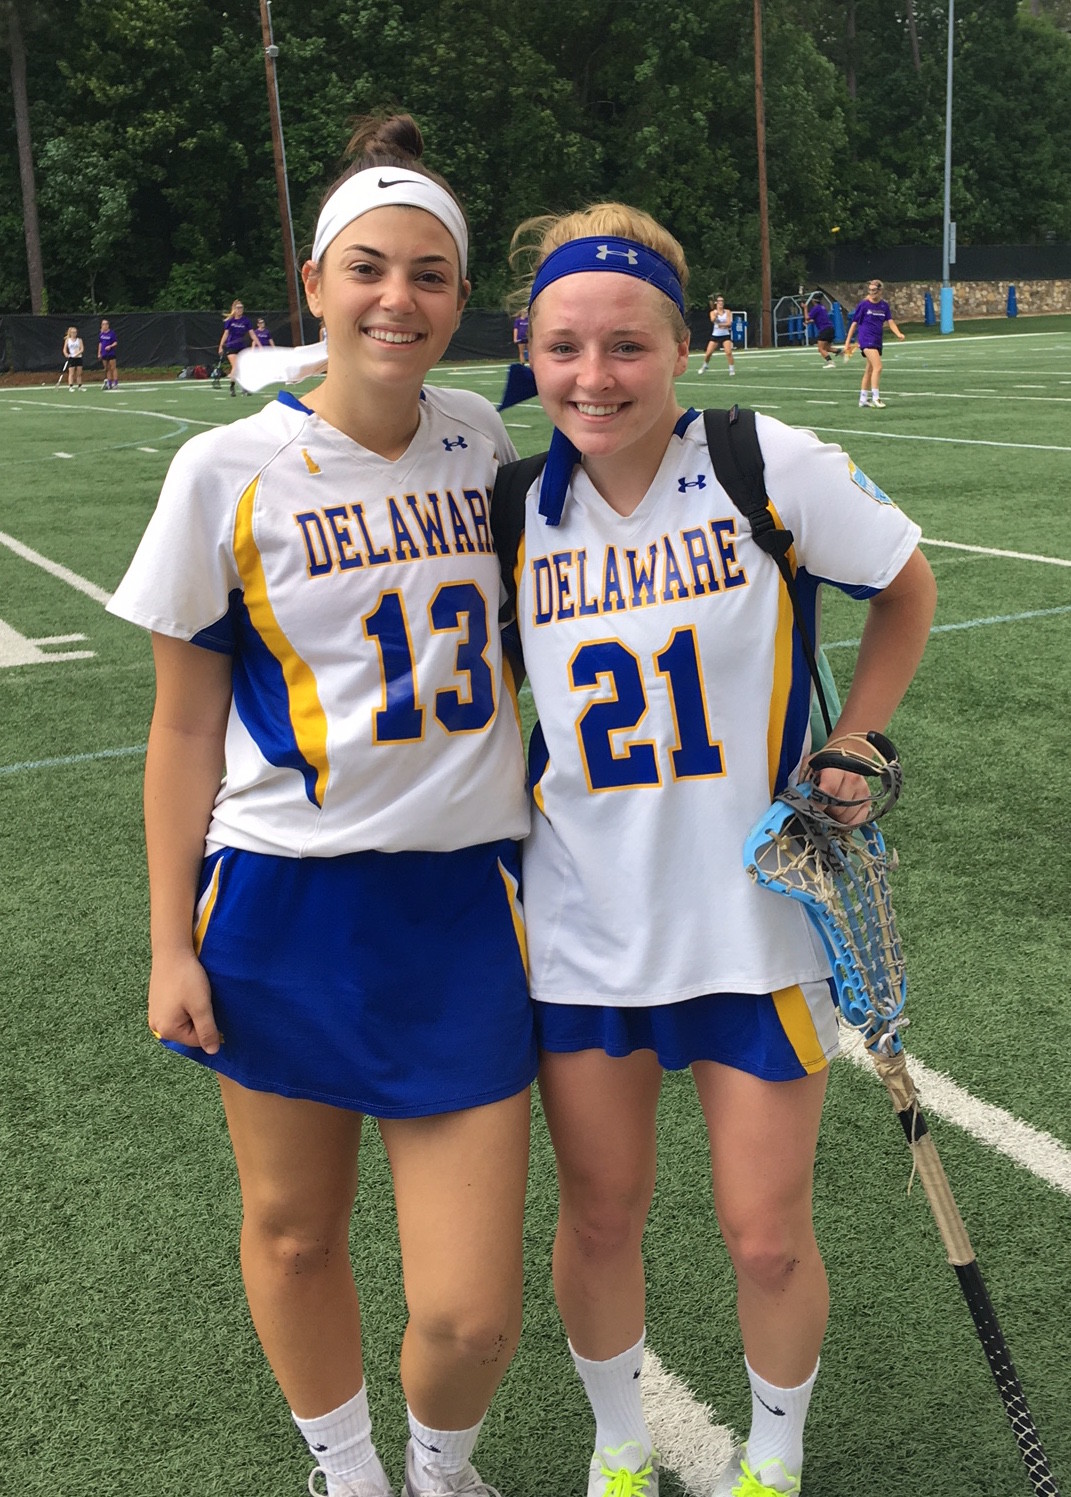 RVC lacrosse players lead Delaware club team to title Herald